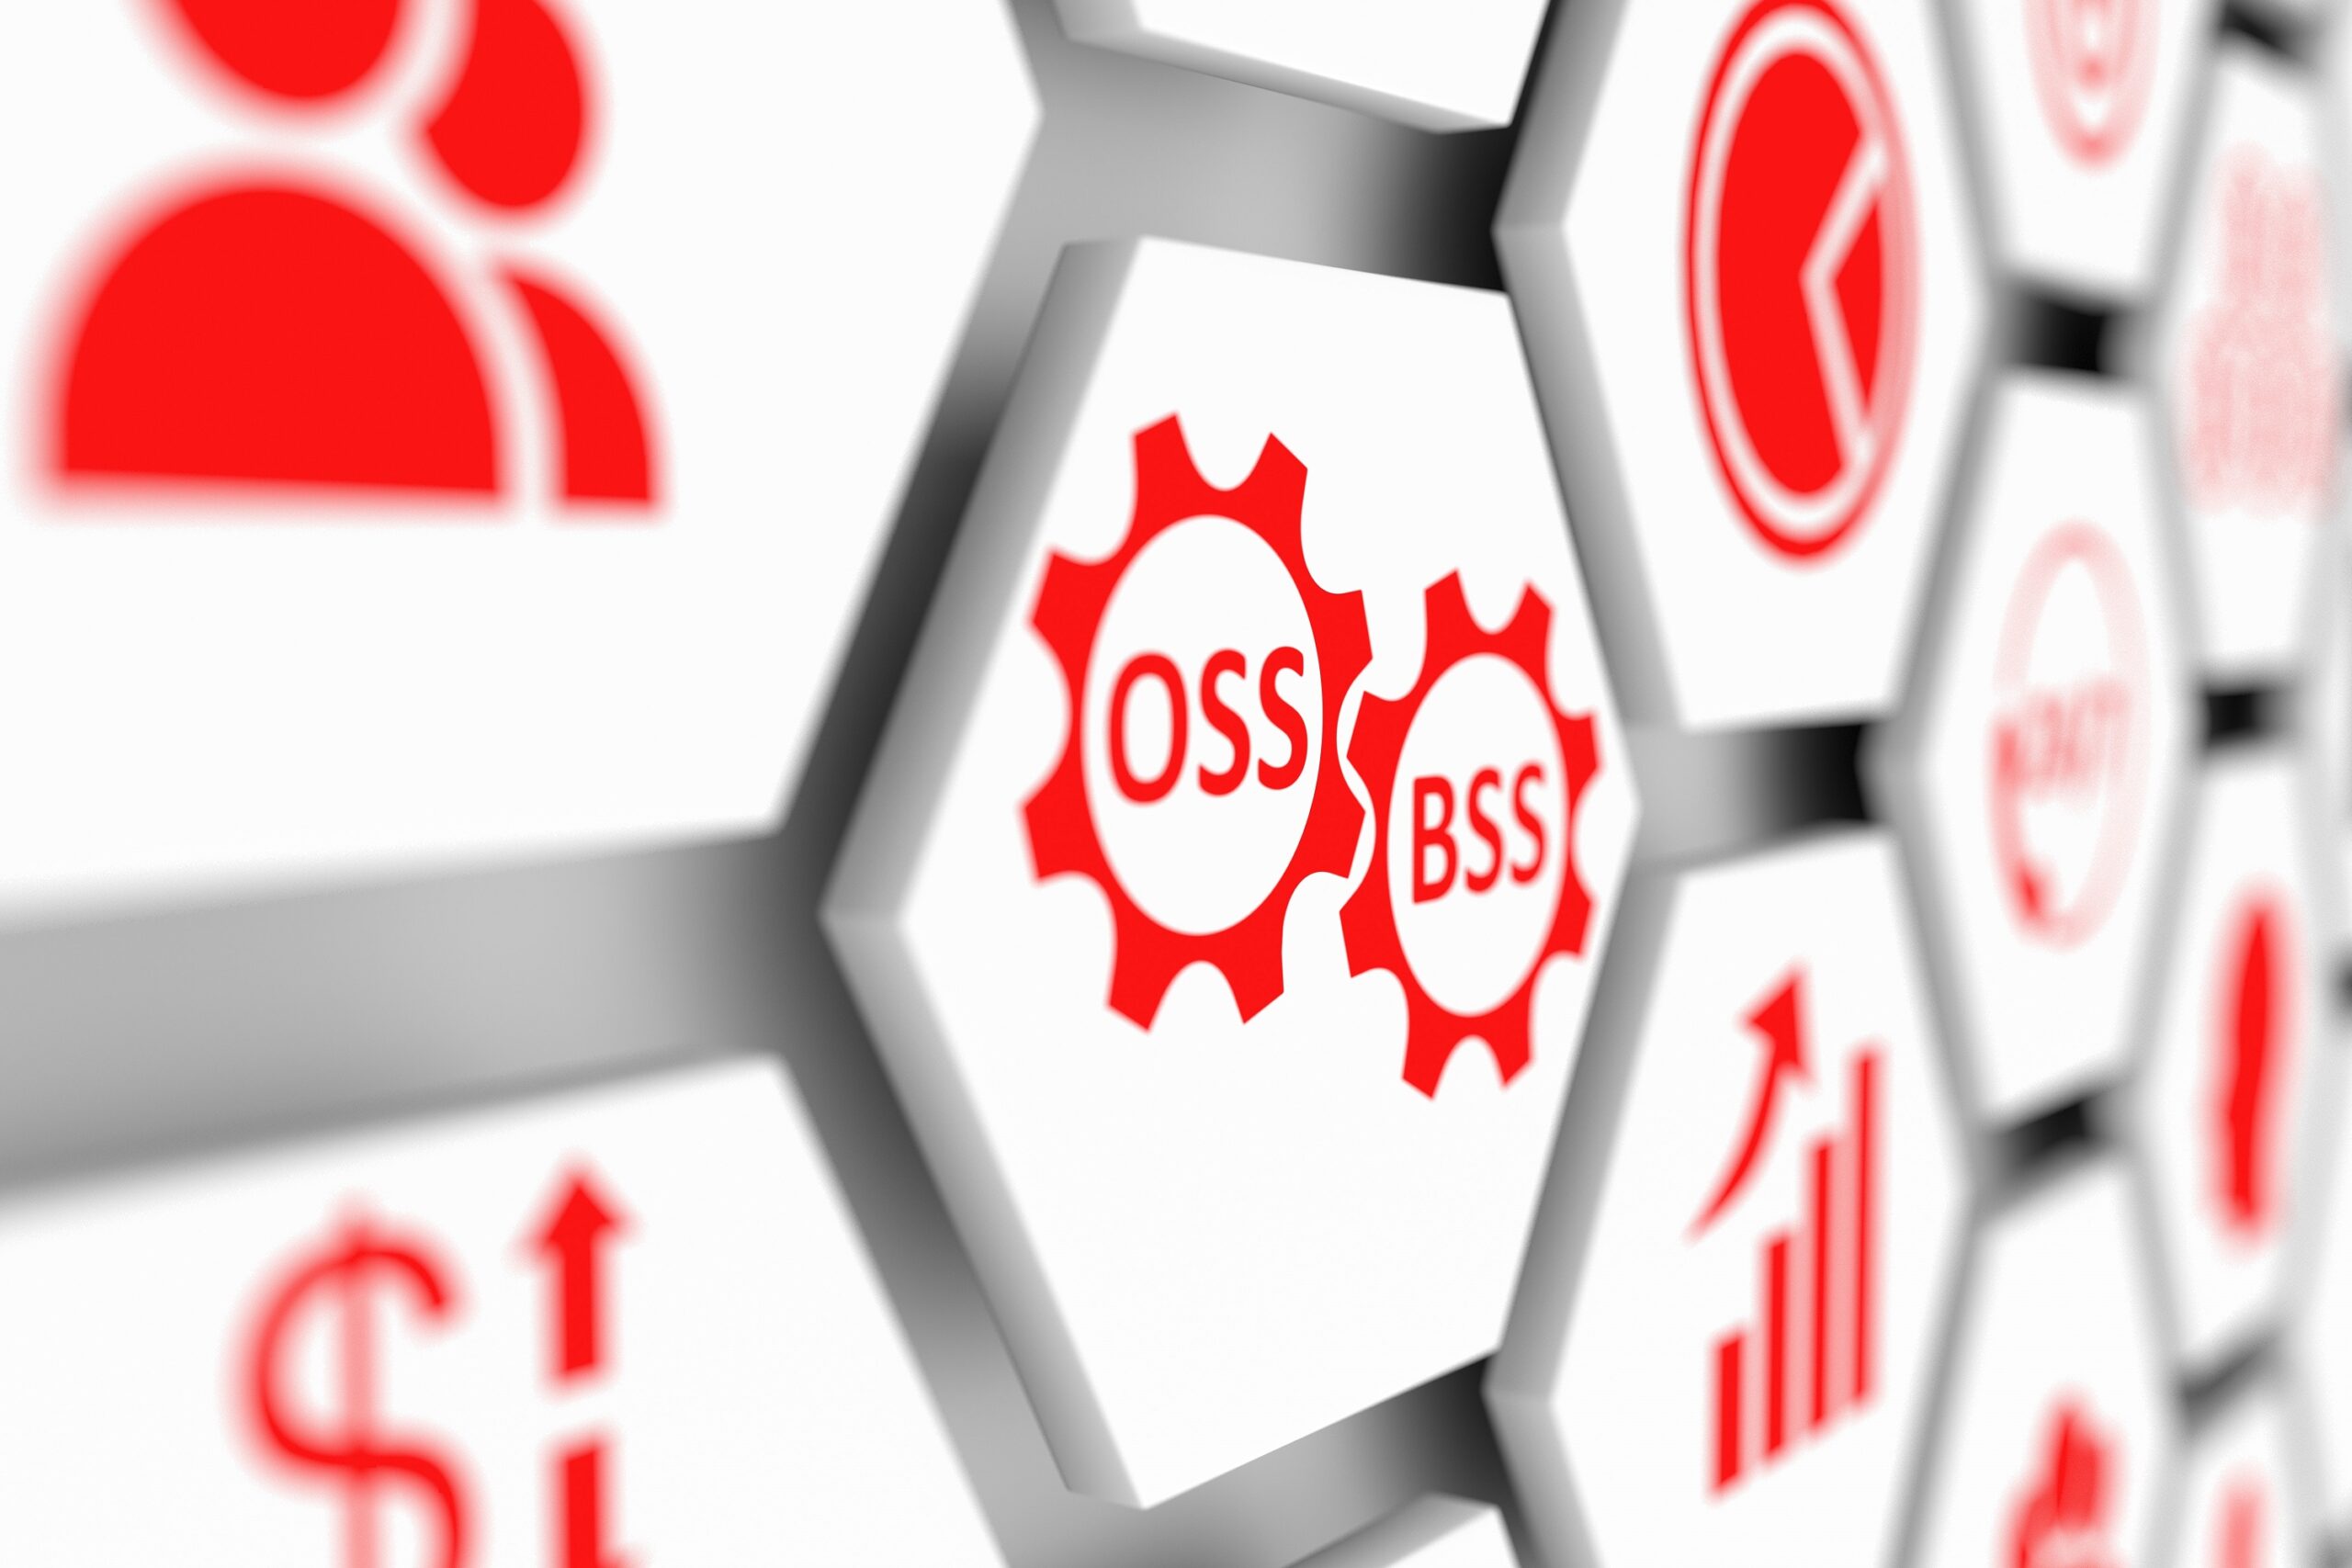 OSS and BSS networks